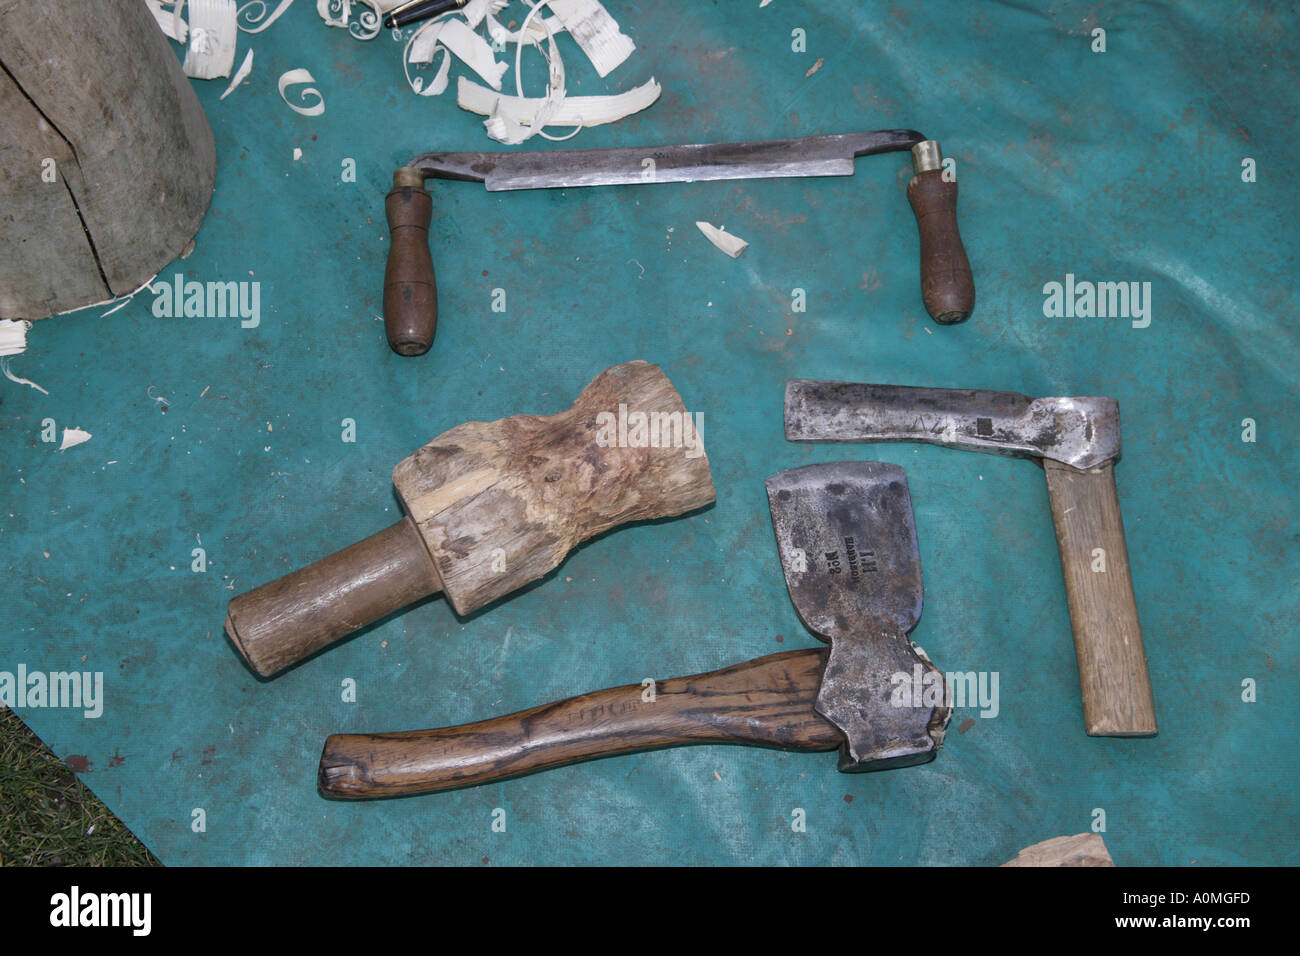 Wooden tent pegs the tools used Stock Photo